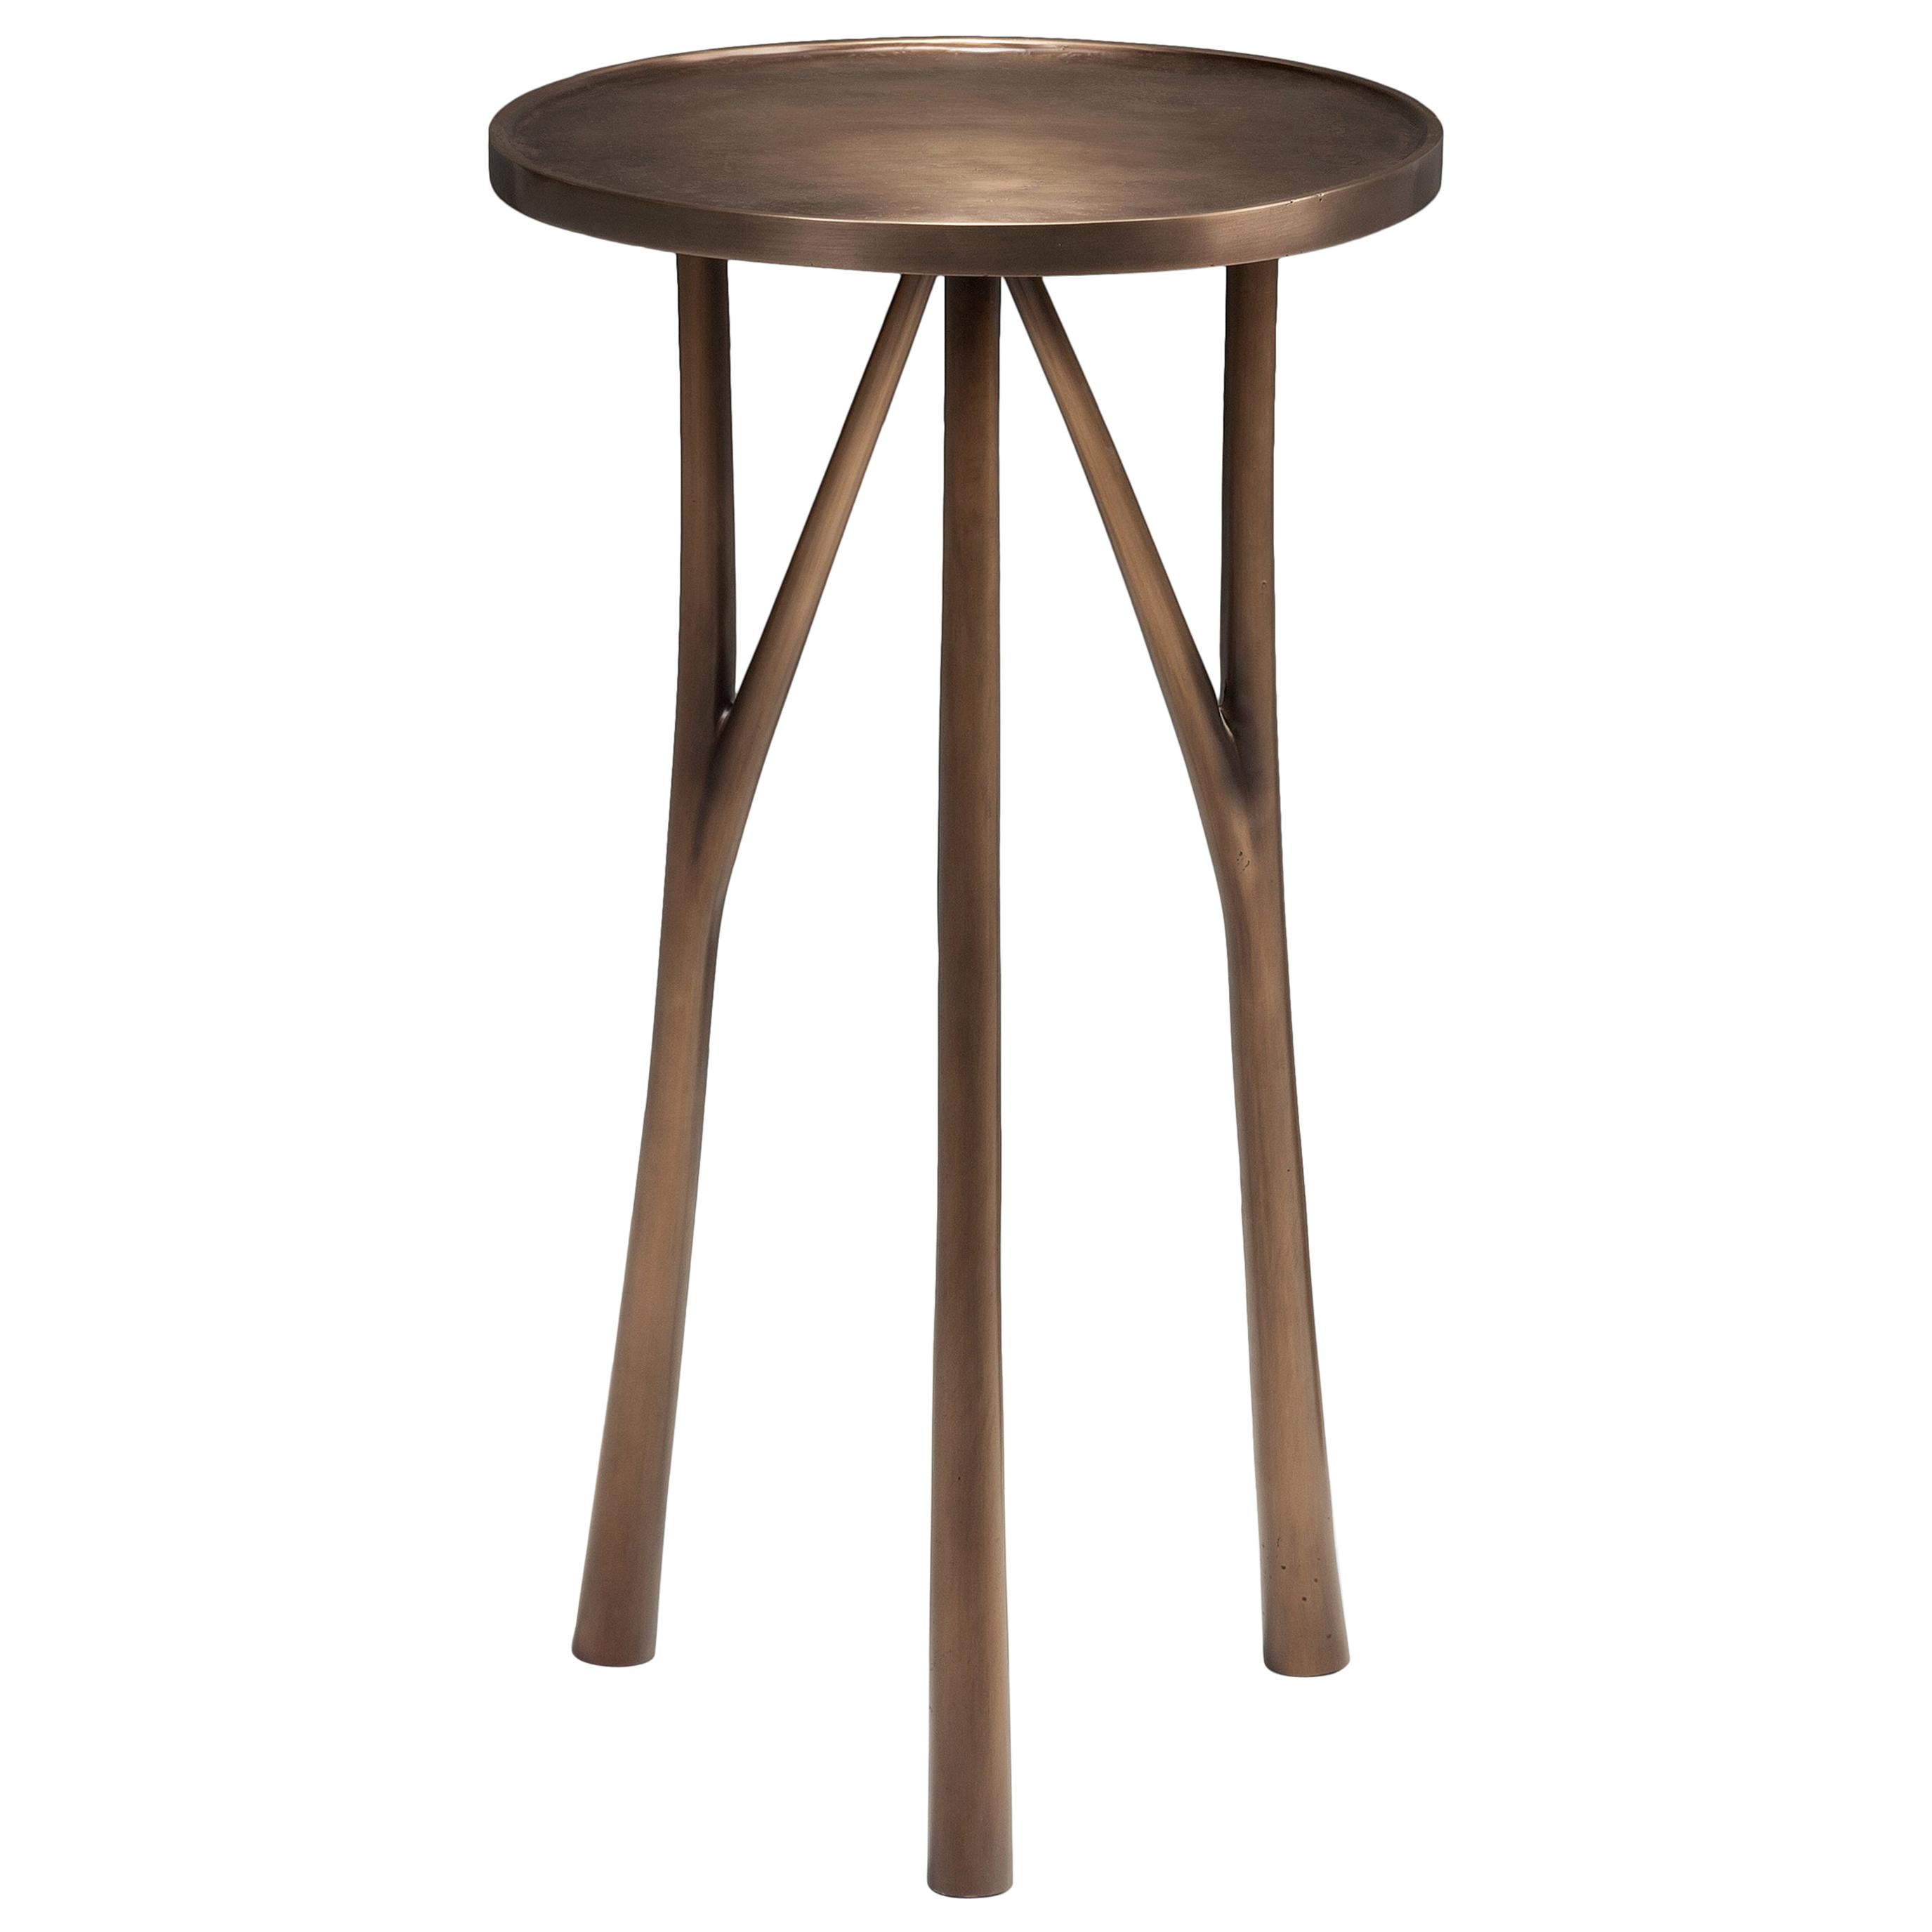 HOLLY HUNT Juniper Round Table in Bronze Monument Light Bronze Patina Finish